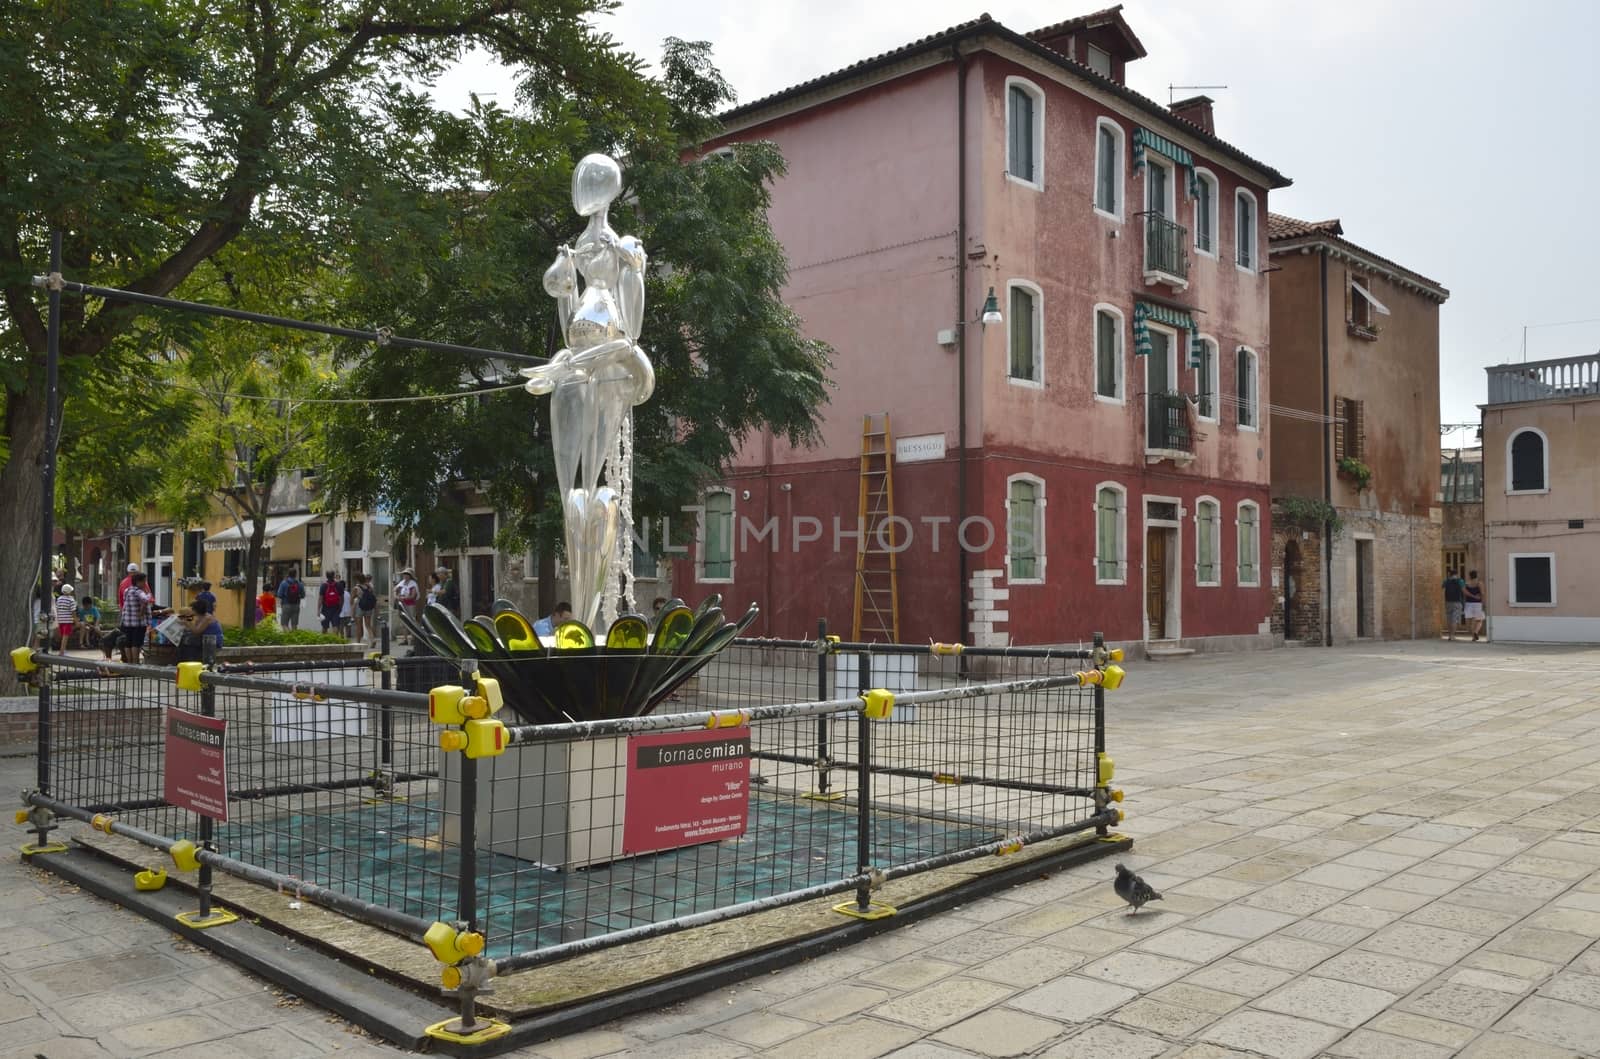 Glass sculpture "Vitae" by Denise Gemin, in a square of Murano, an island of Venice,  Italy.